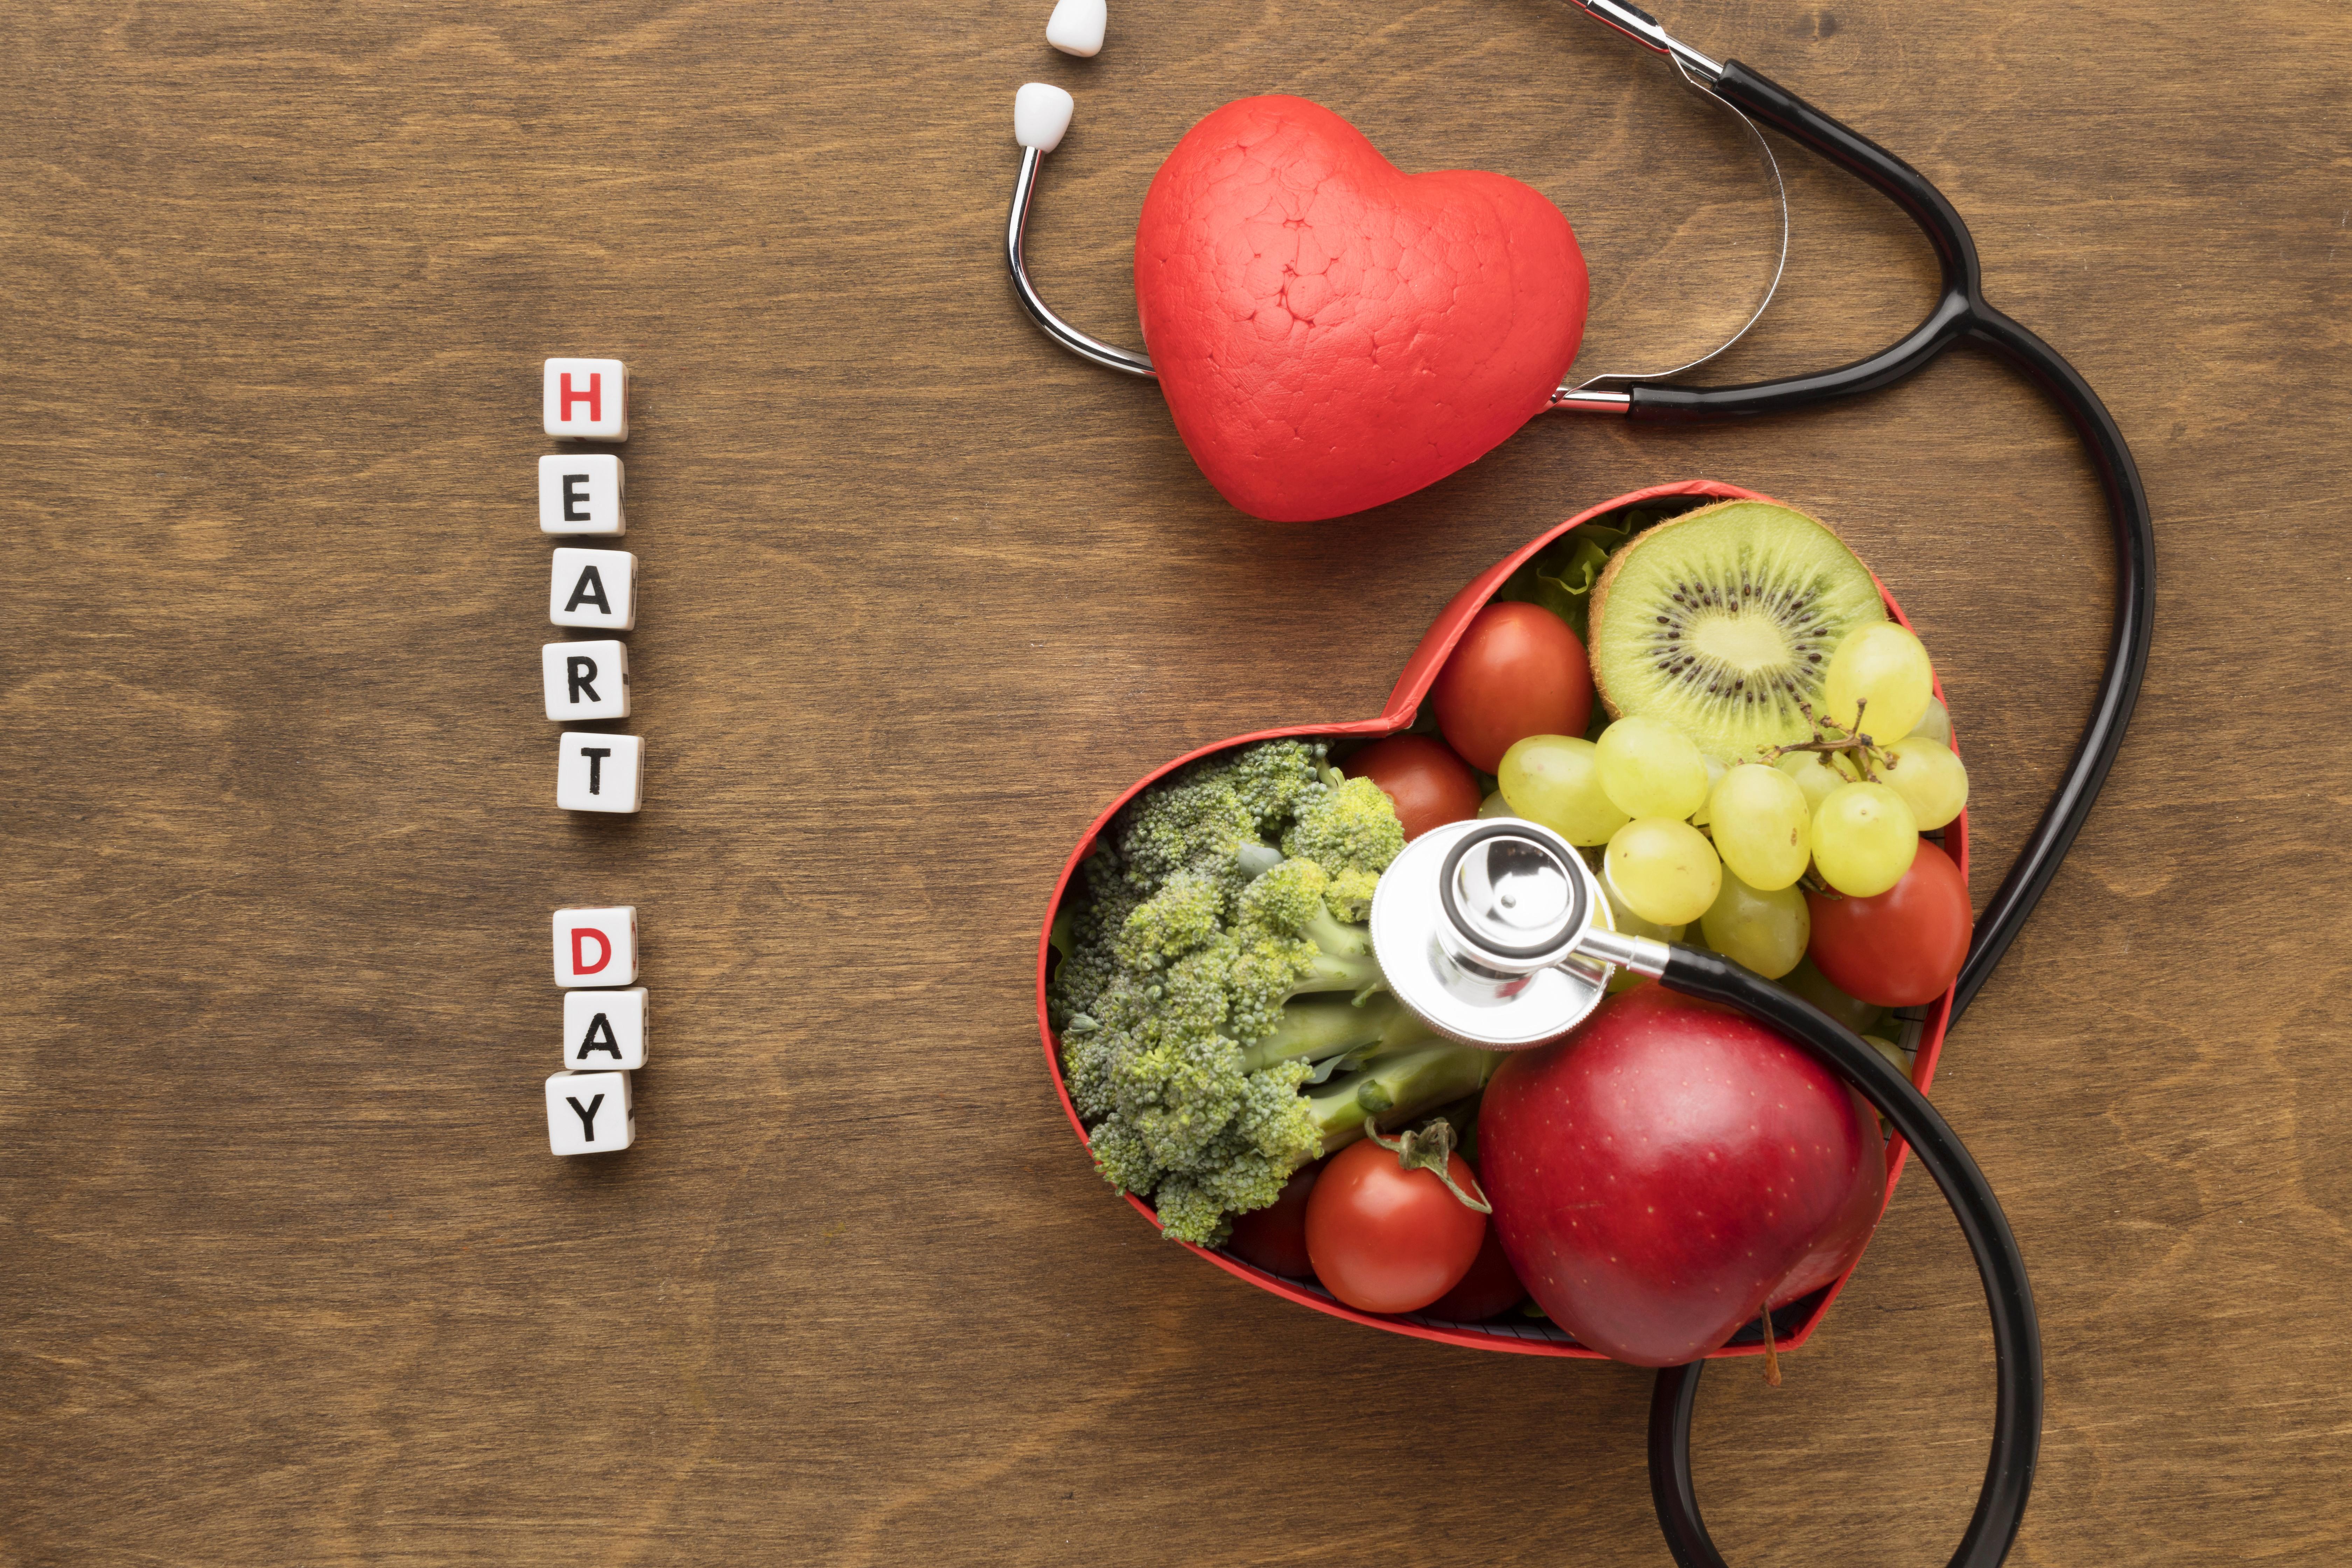 world-heart-day-concept-with-healthy-food